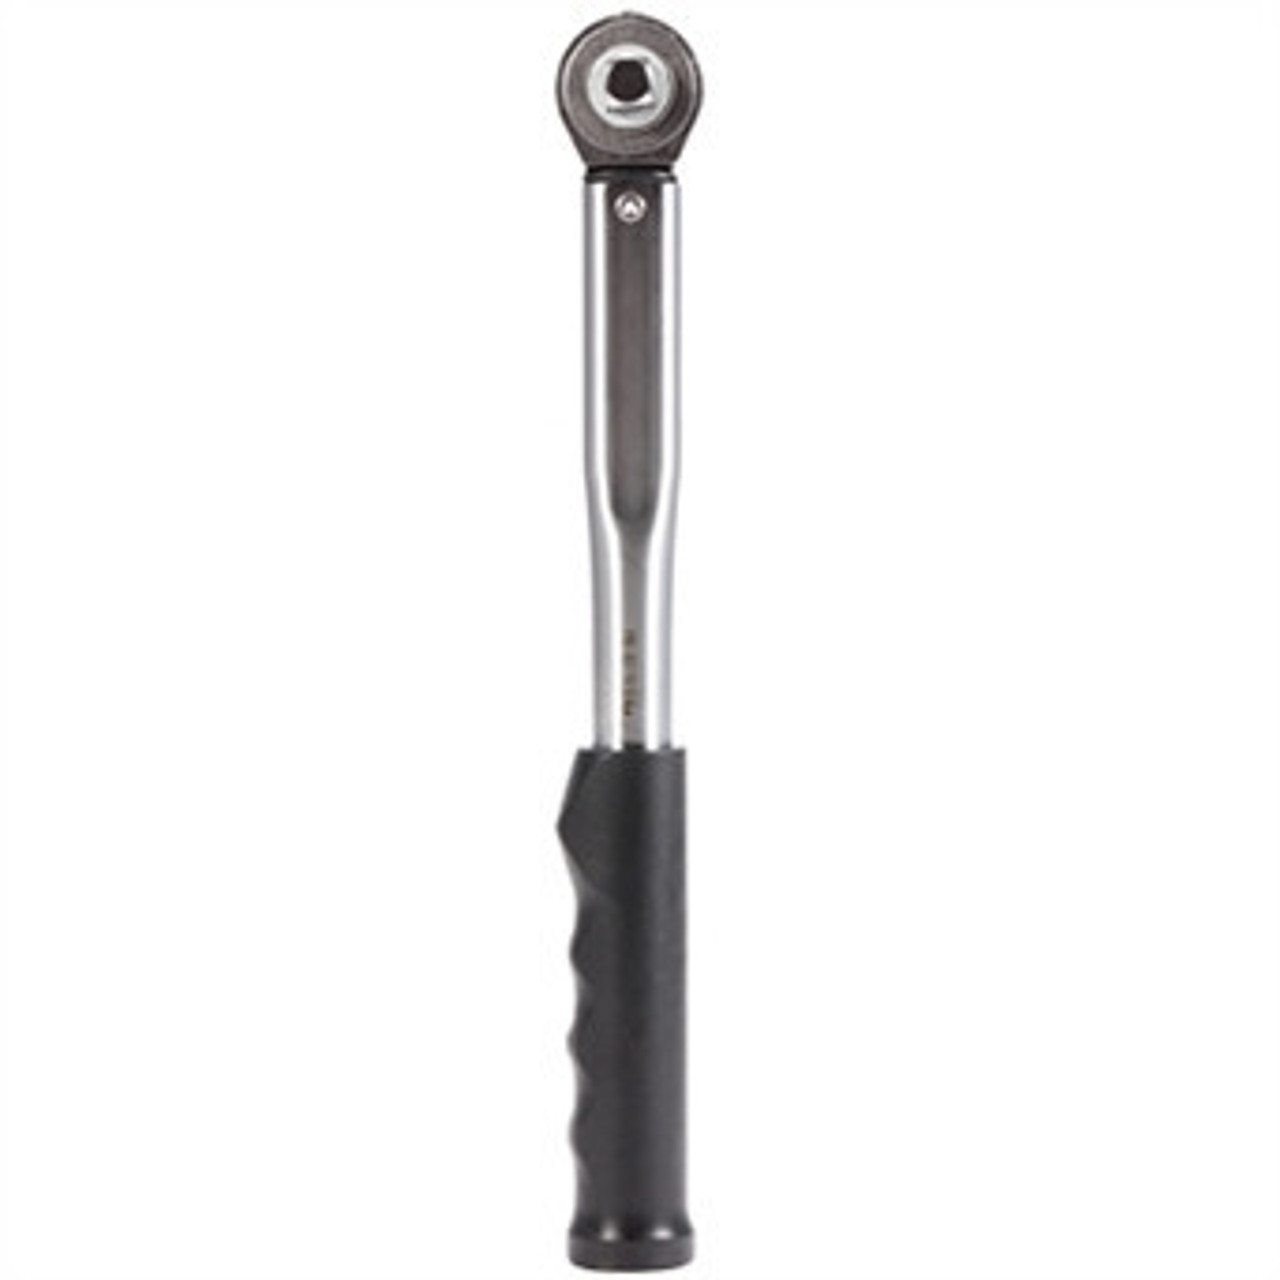 Norbar Preset Ratchet Torque Wrench with 1/2" Square Drive